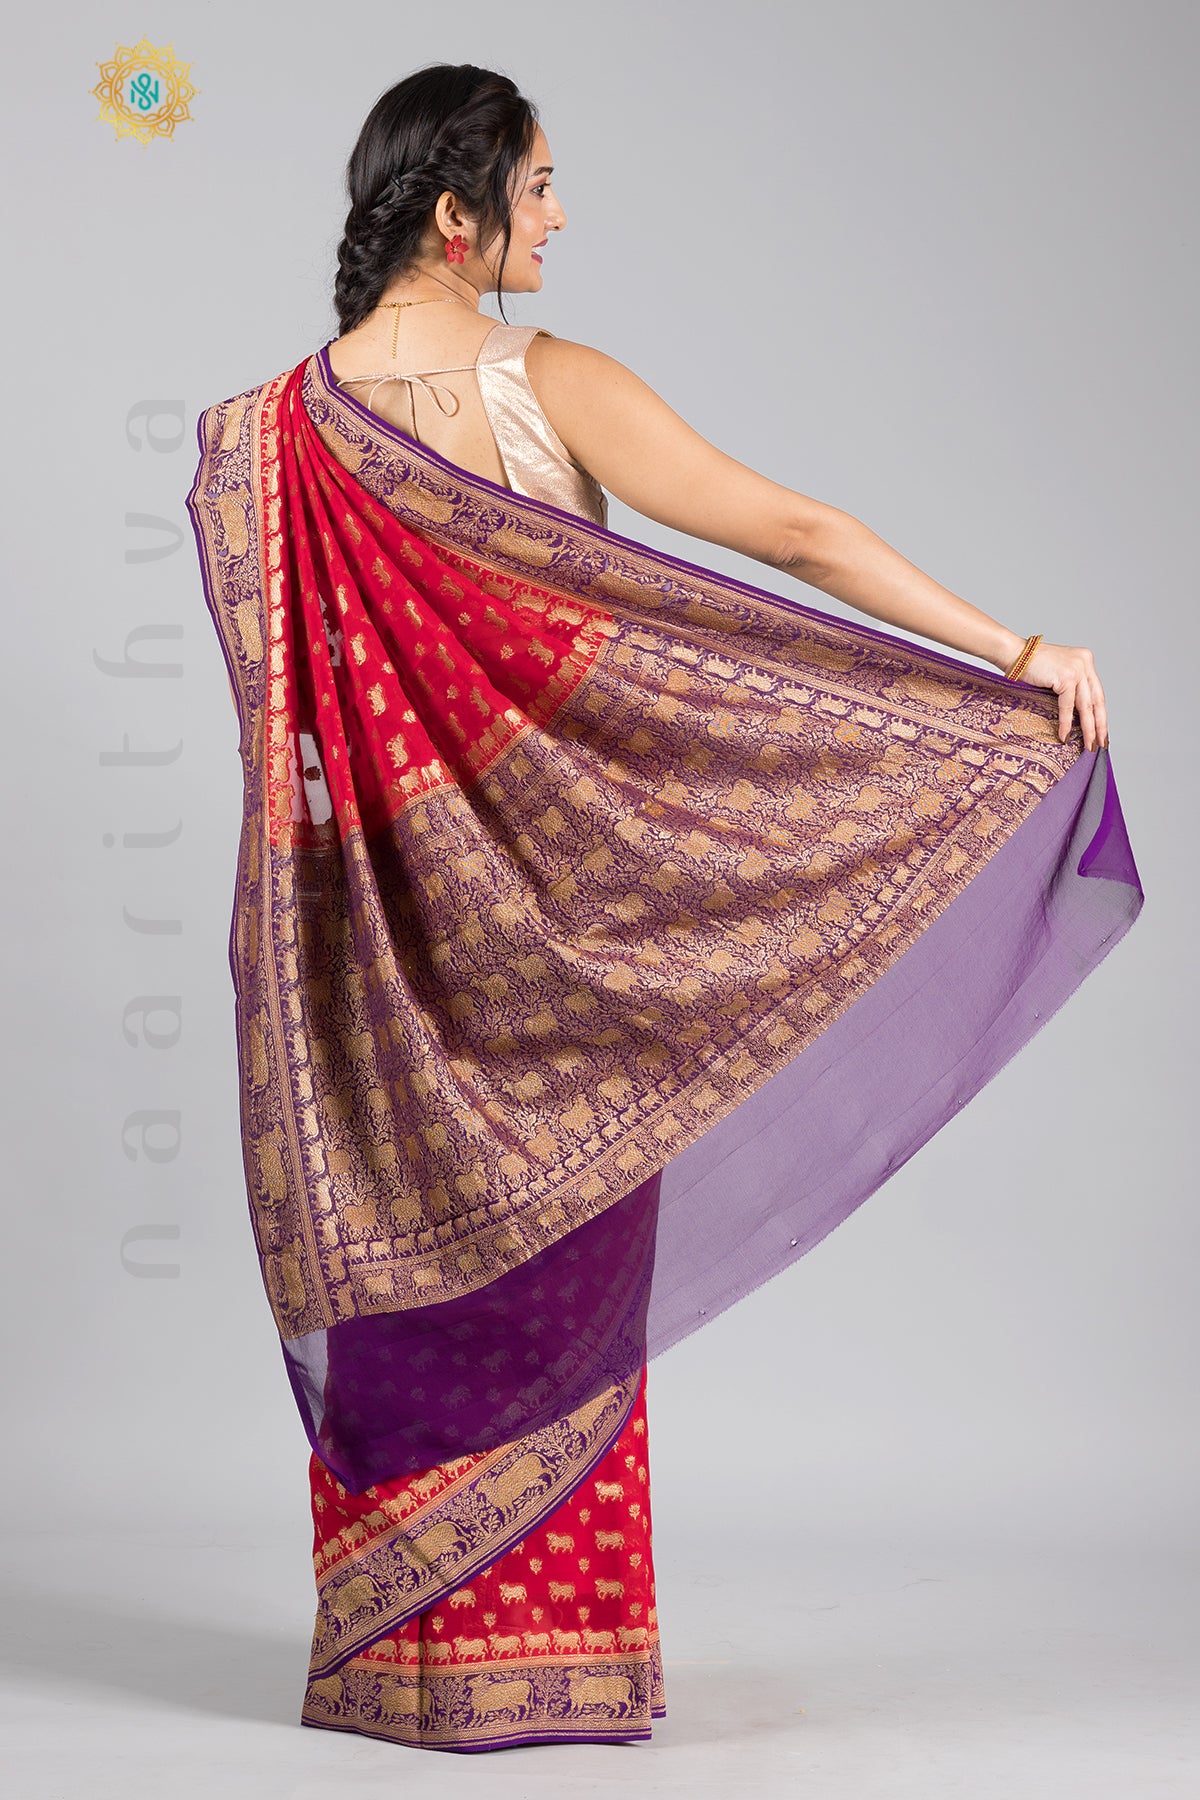 RED WITH PURPLE - PURE HANDLOOM GEORGETTE BANARAS IN PICHWAI ANTIQUE ZARI WEAVING WITH CONTRAST BORDER & BLOUSE